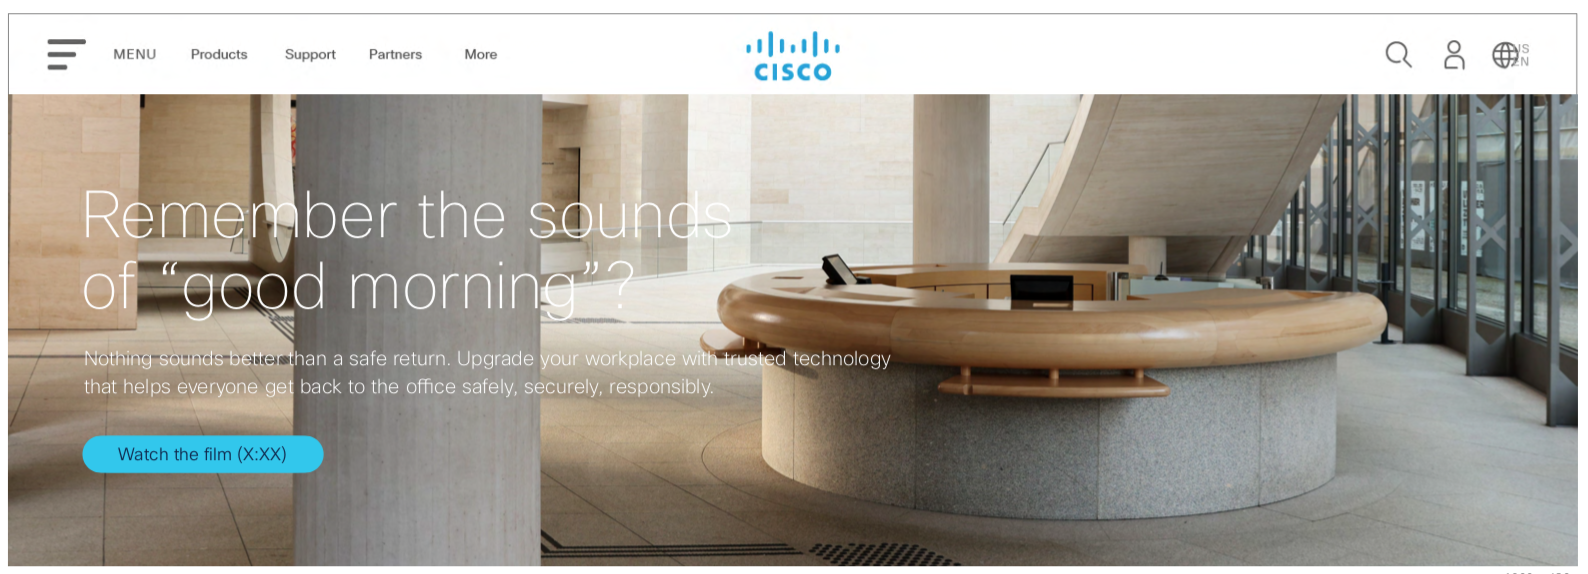 Cisco Trusted Workplace Webpage